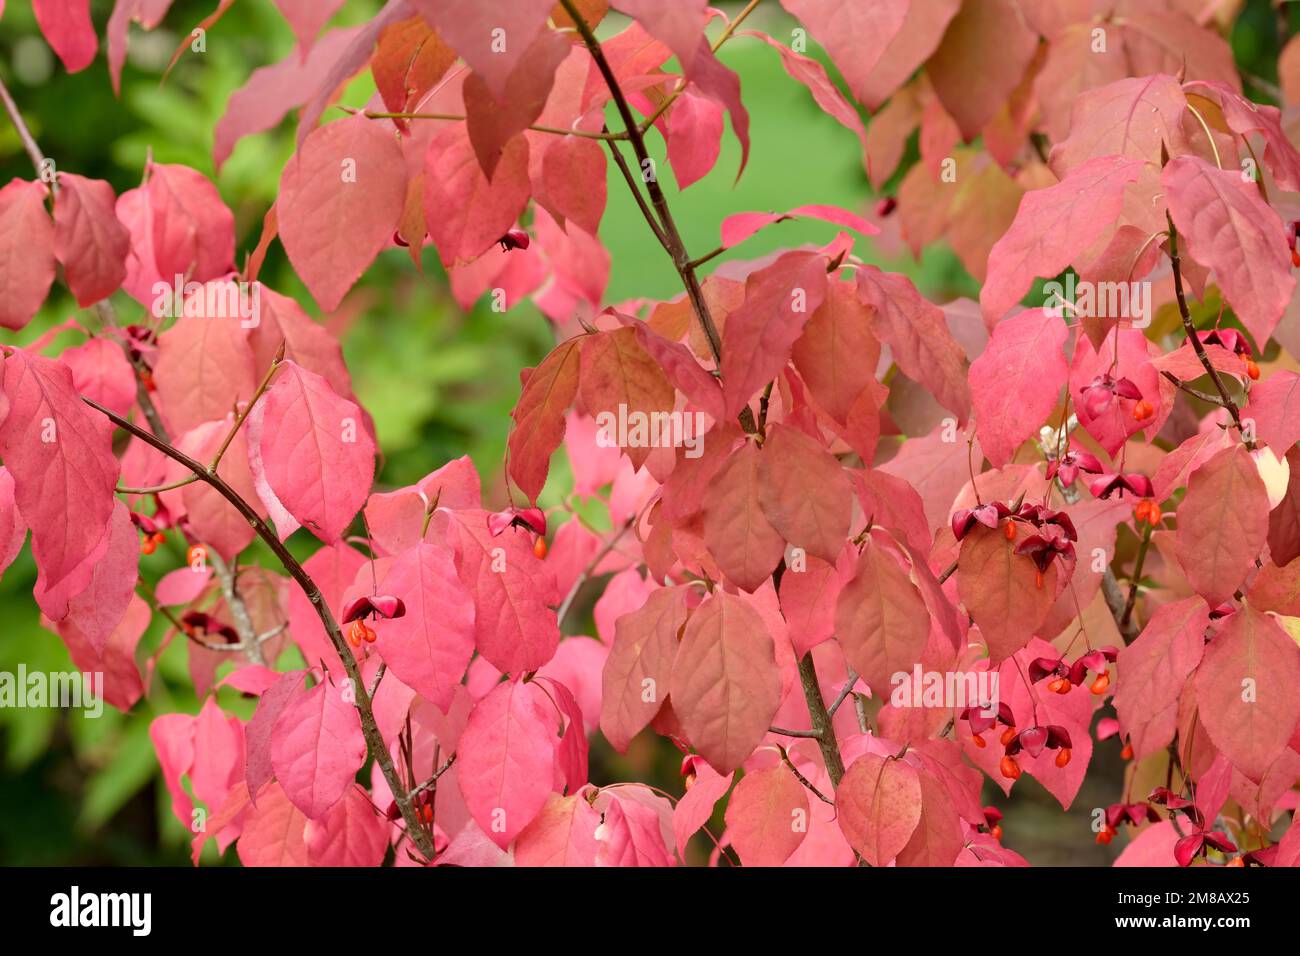 Euonymus planipes 'Sancho’, Euonymus sachalinensis 'Sancho, flat-stalked spindle 'Sancho’, red fruits in autumn, red autumn foliage Stock Photo